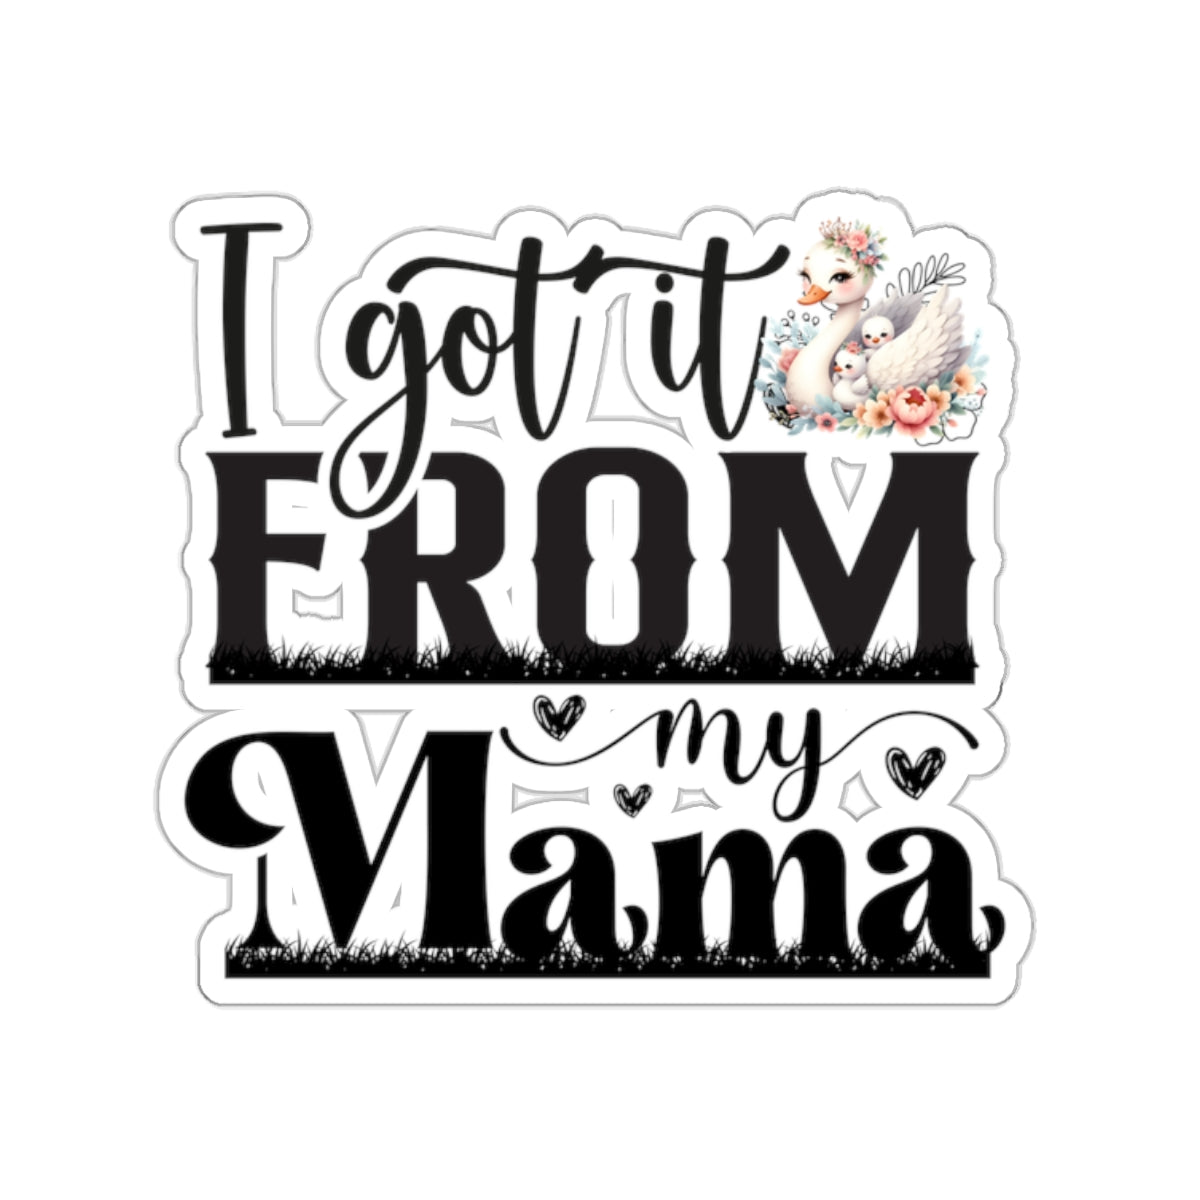 Happy Mother's Day Kiss-Cut Stickers